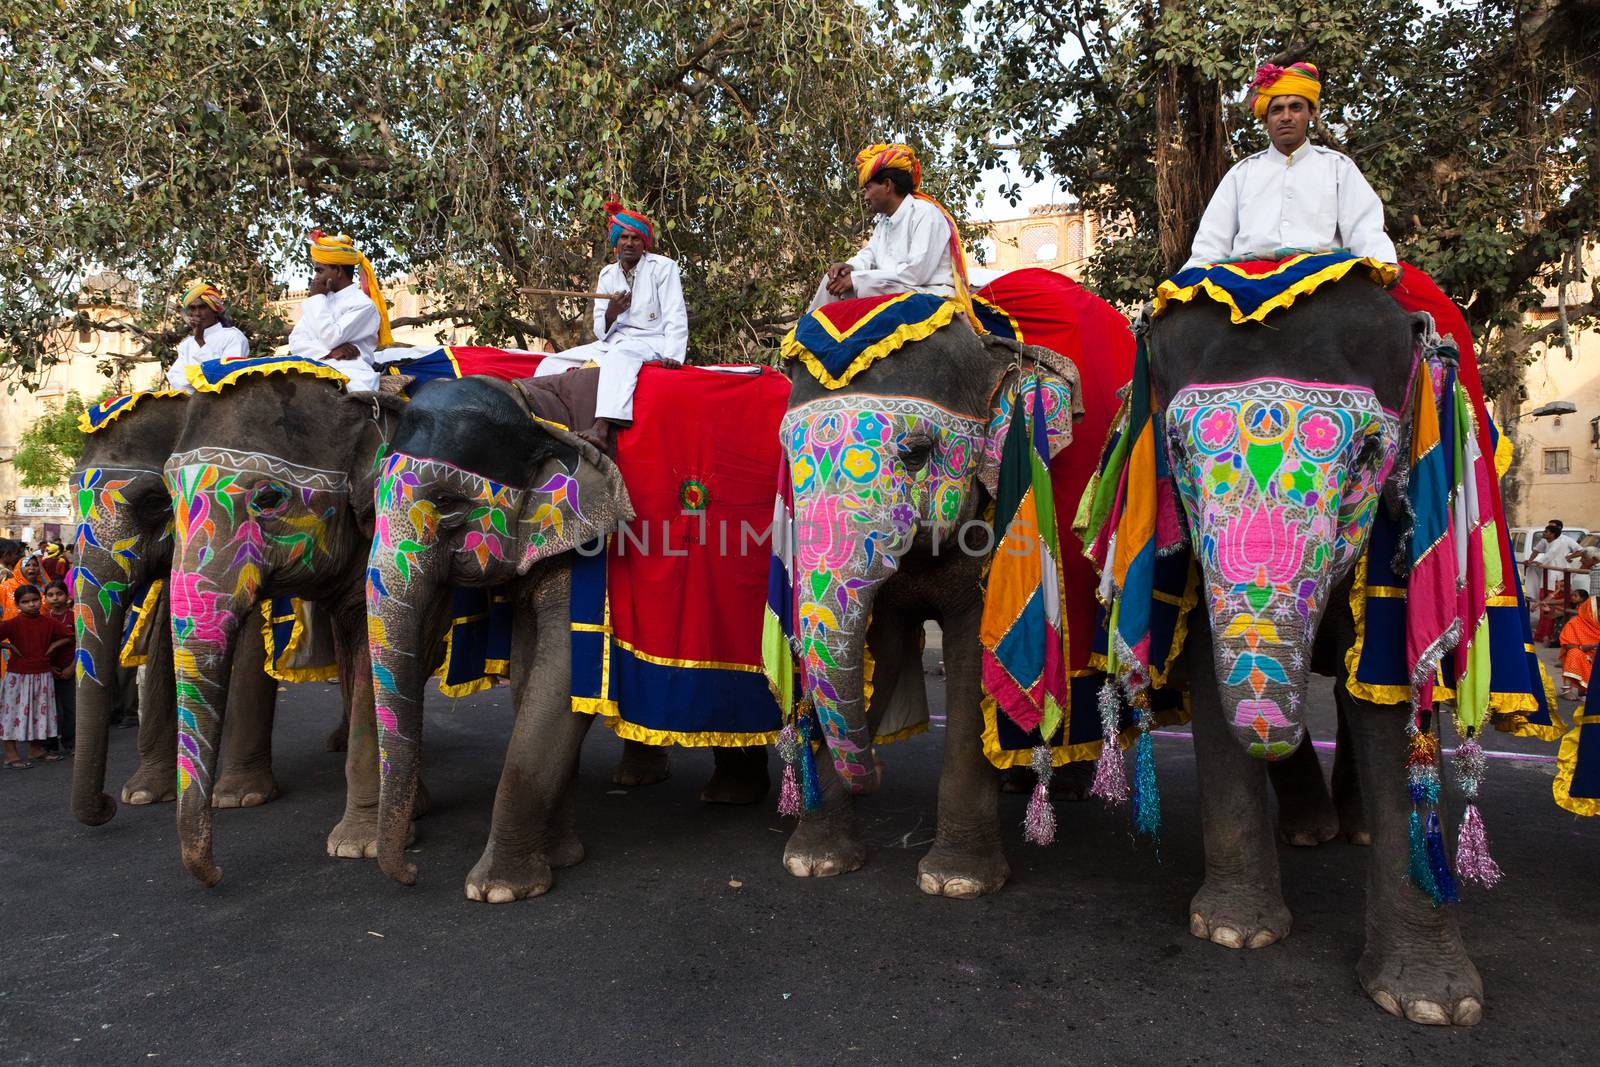 Jaipur, India - March 29, 2009: people riding elephants in the celebration of the Gangaur festival, one of the most important of the year march 29th 2009 in Jaipur, Rajasthan, India